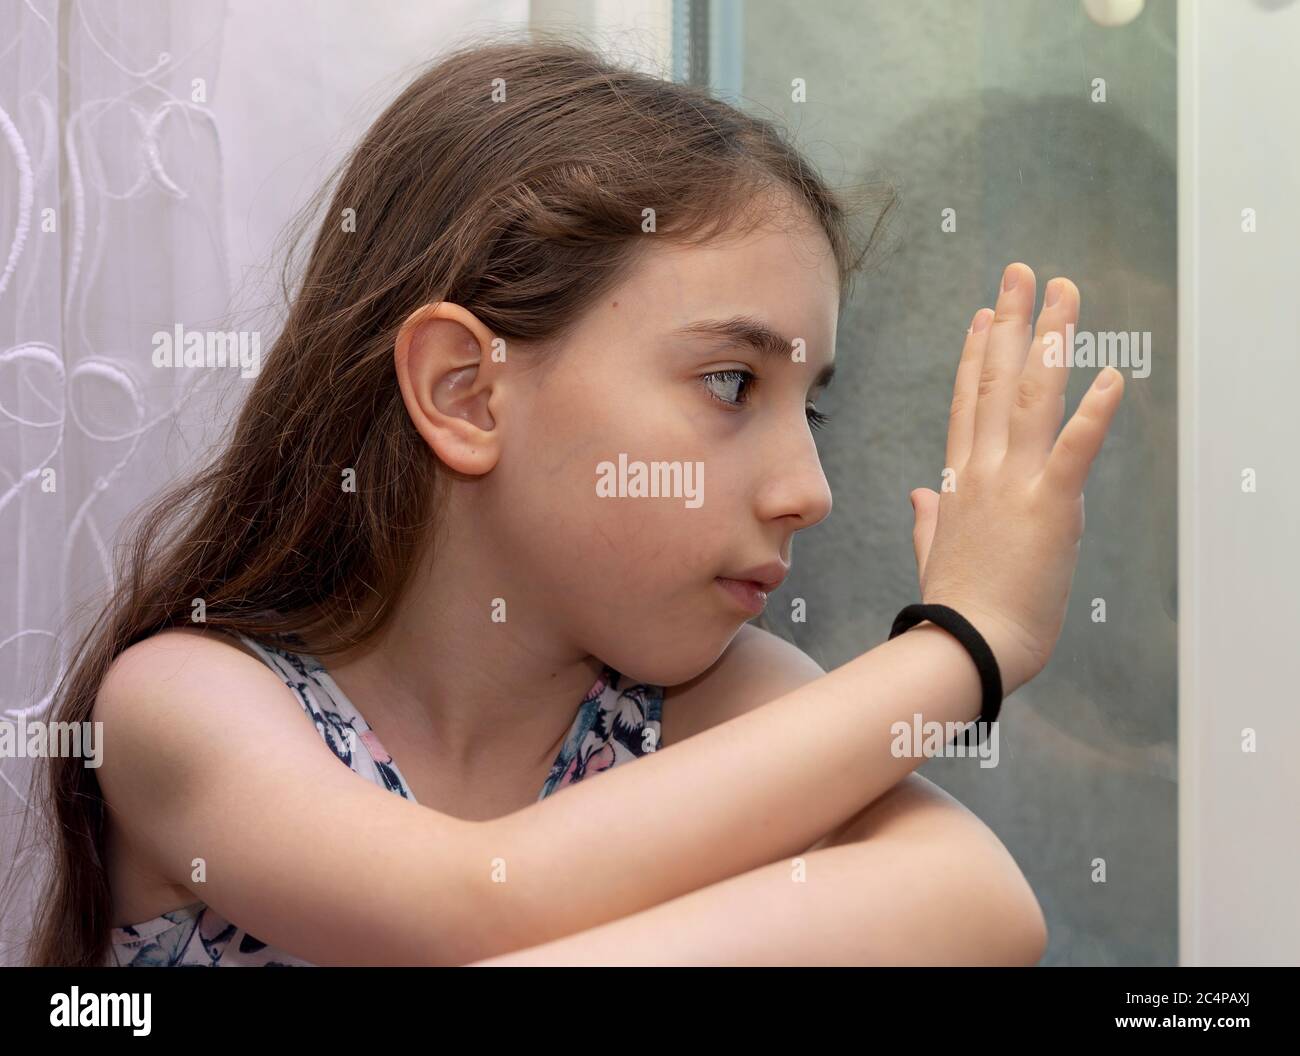 Unhappy and bored little girl waiting for behind the window.  A bored and depressed little girl put her head on the windows during corona quarantine Stock Photo